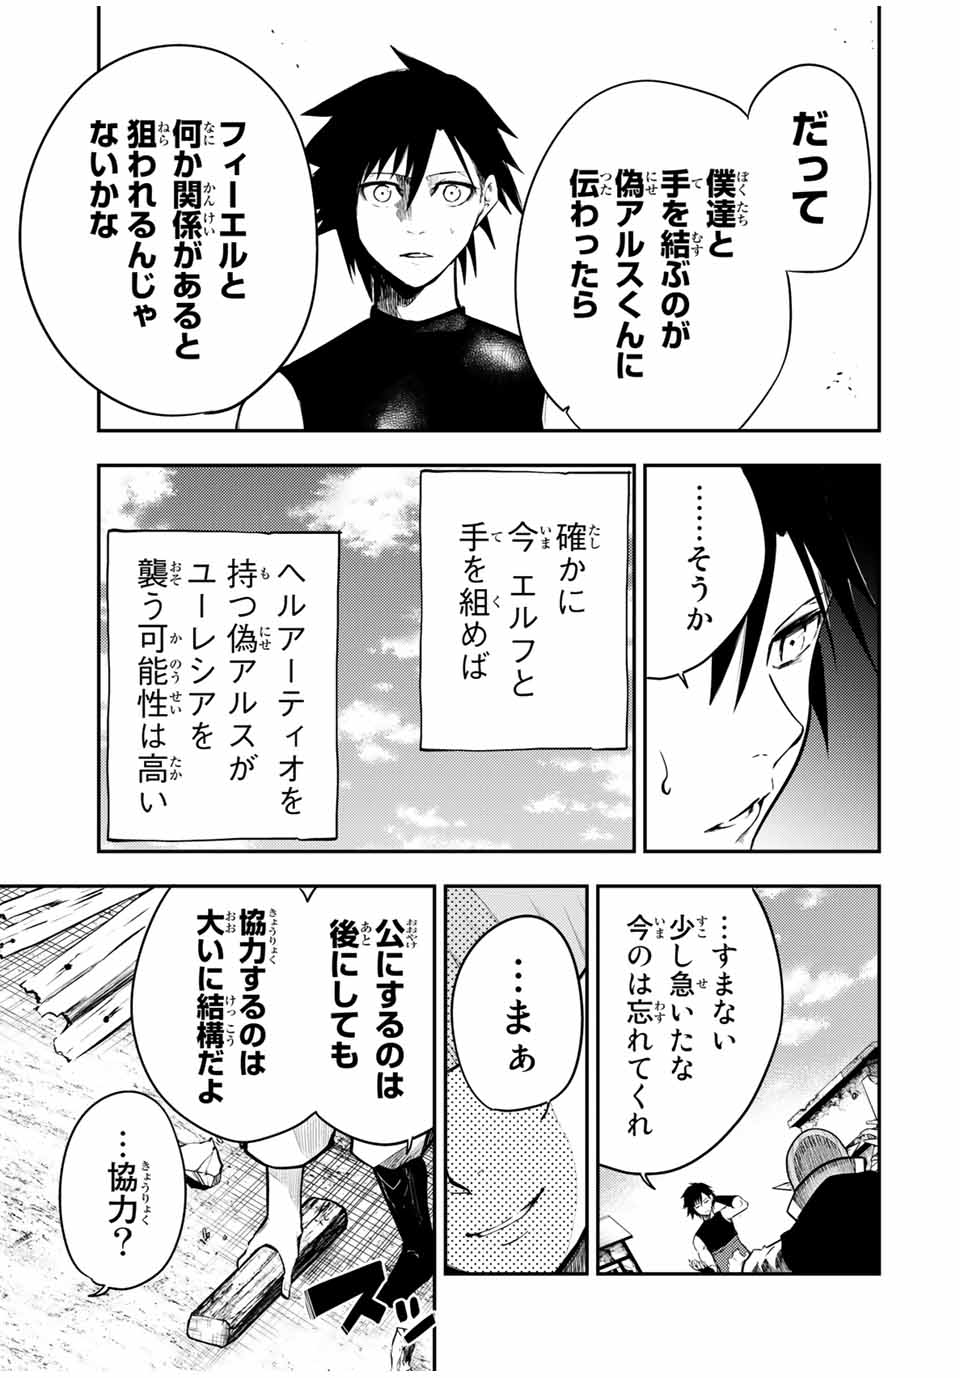 the strongest former prince-; 奴隷転生 ～その奴隷、最強の元王子につき～ 第50話 - Page 15